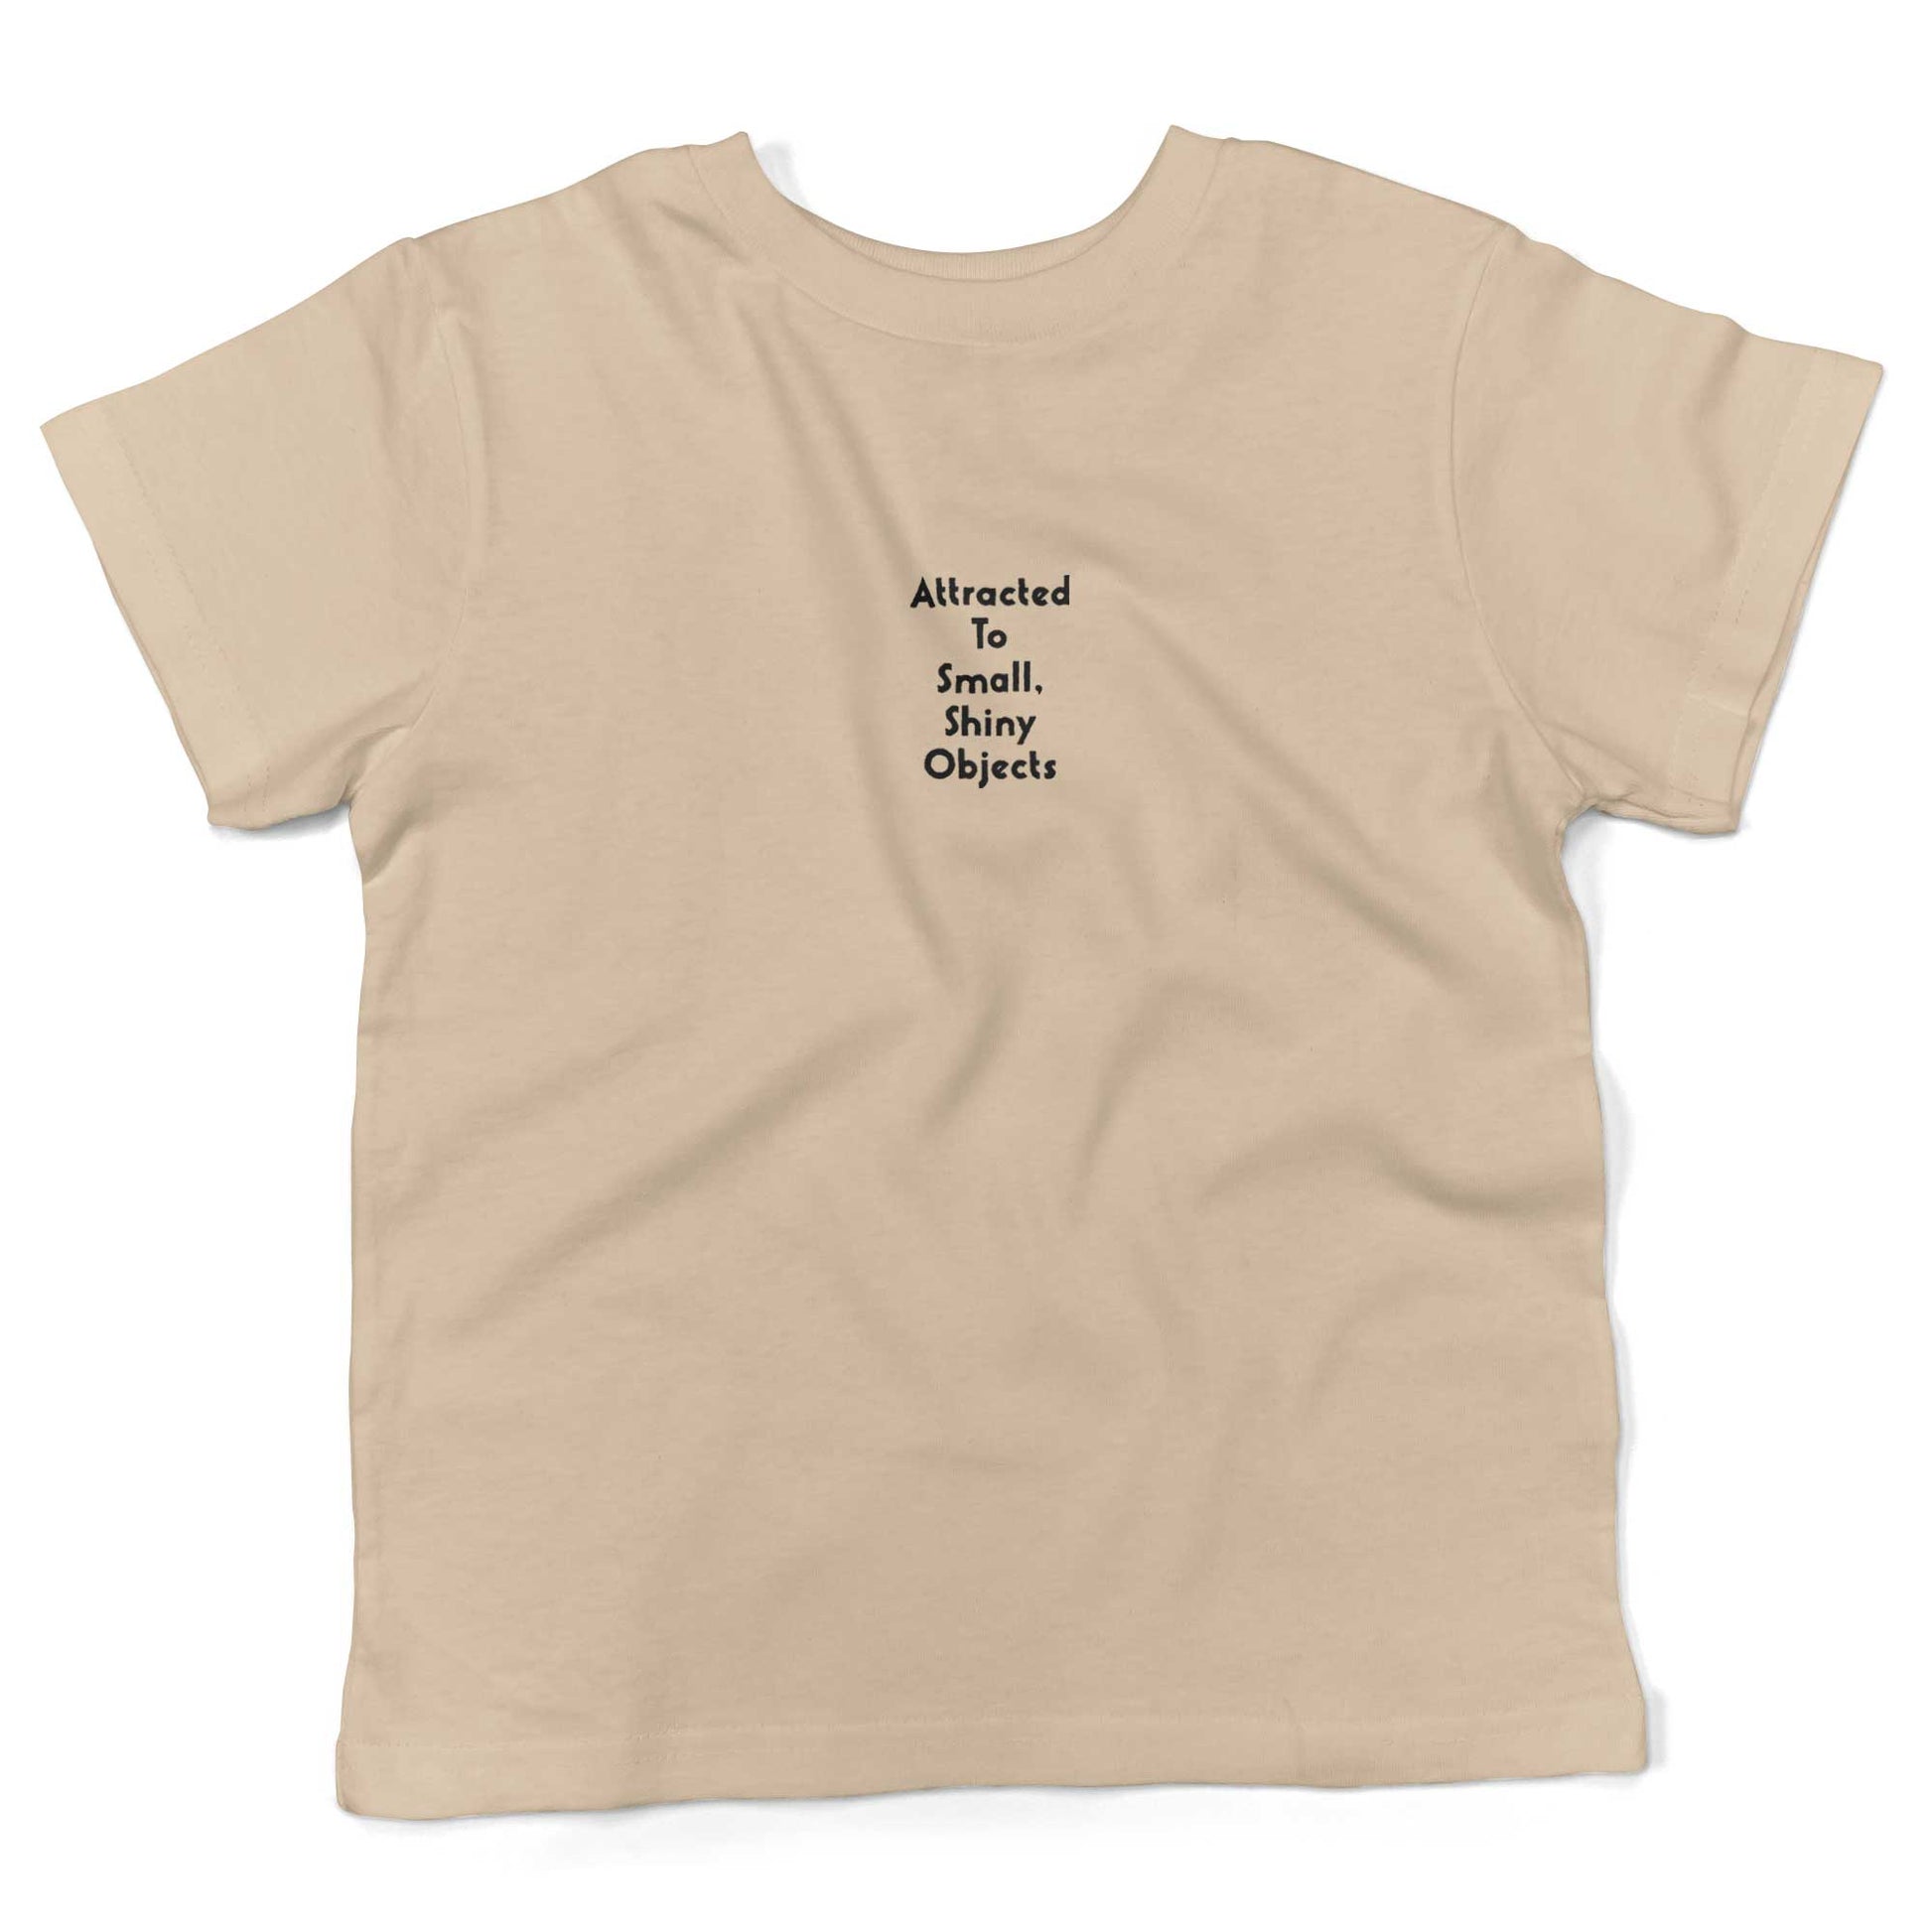 Attracted To Small, Shiny Objects Toddler Shirt-Organic Natural-2T